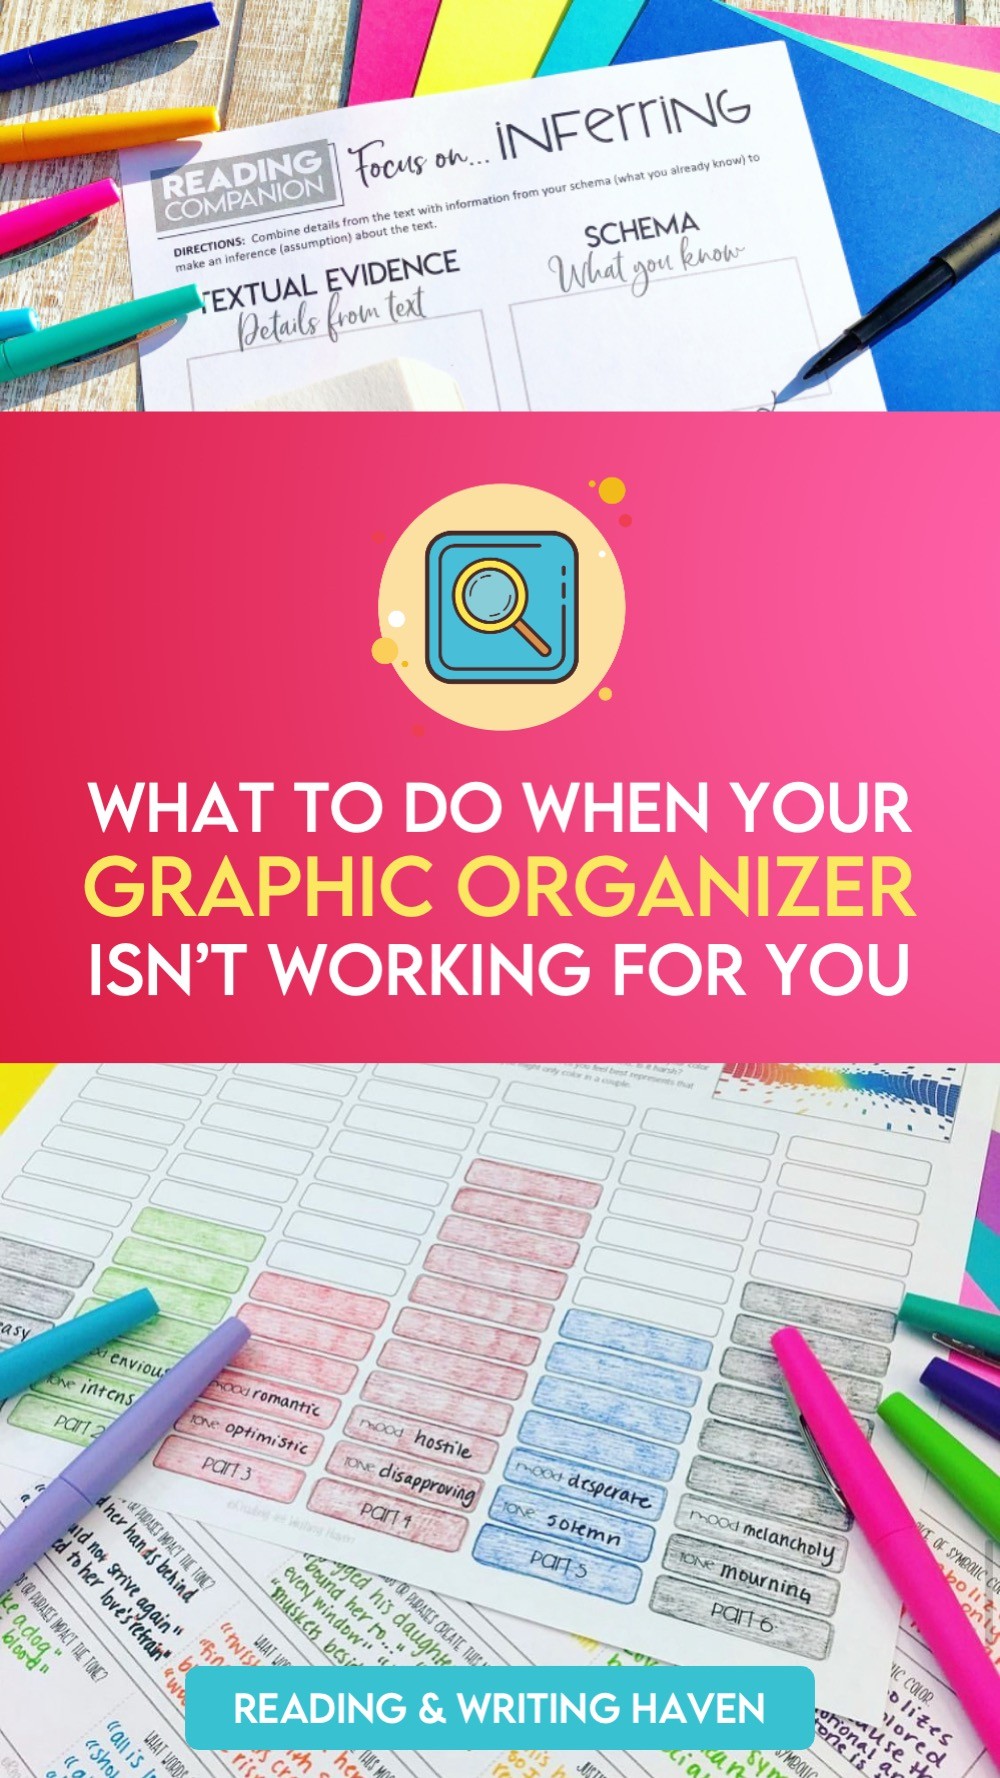 Make better use of graphic organizers. Make them work for you!